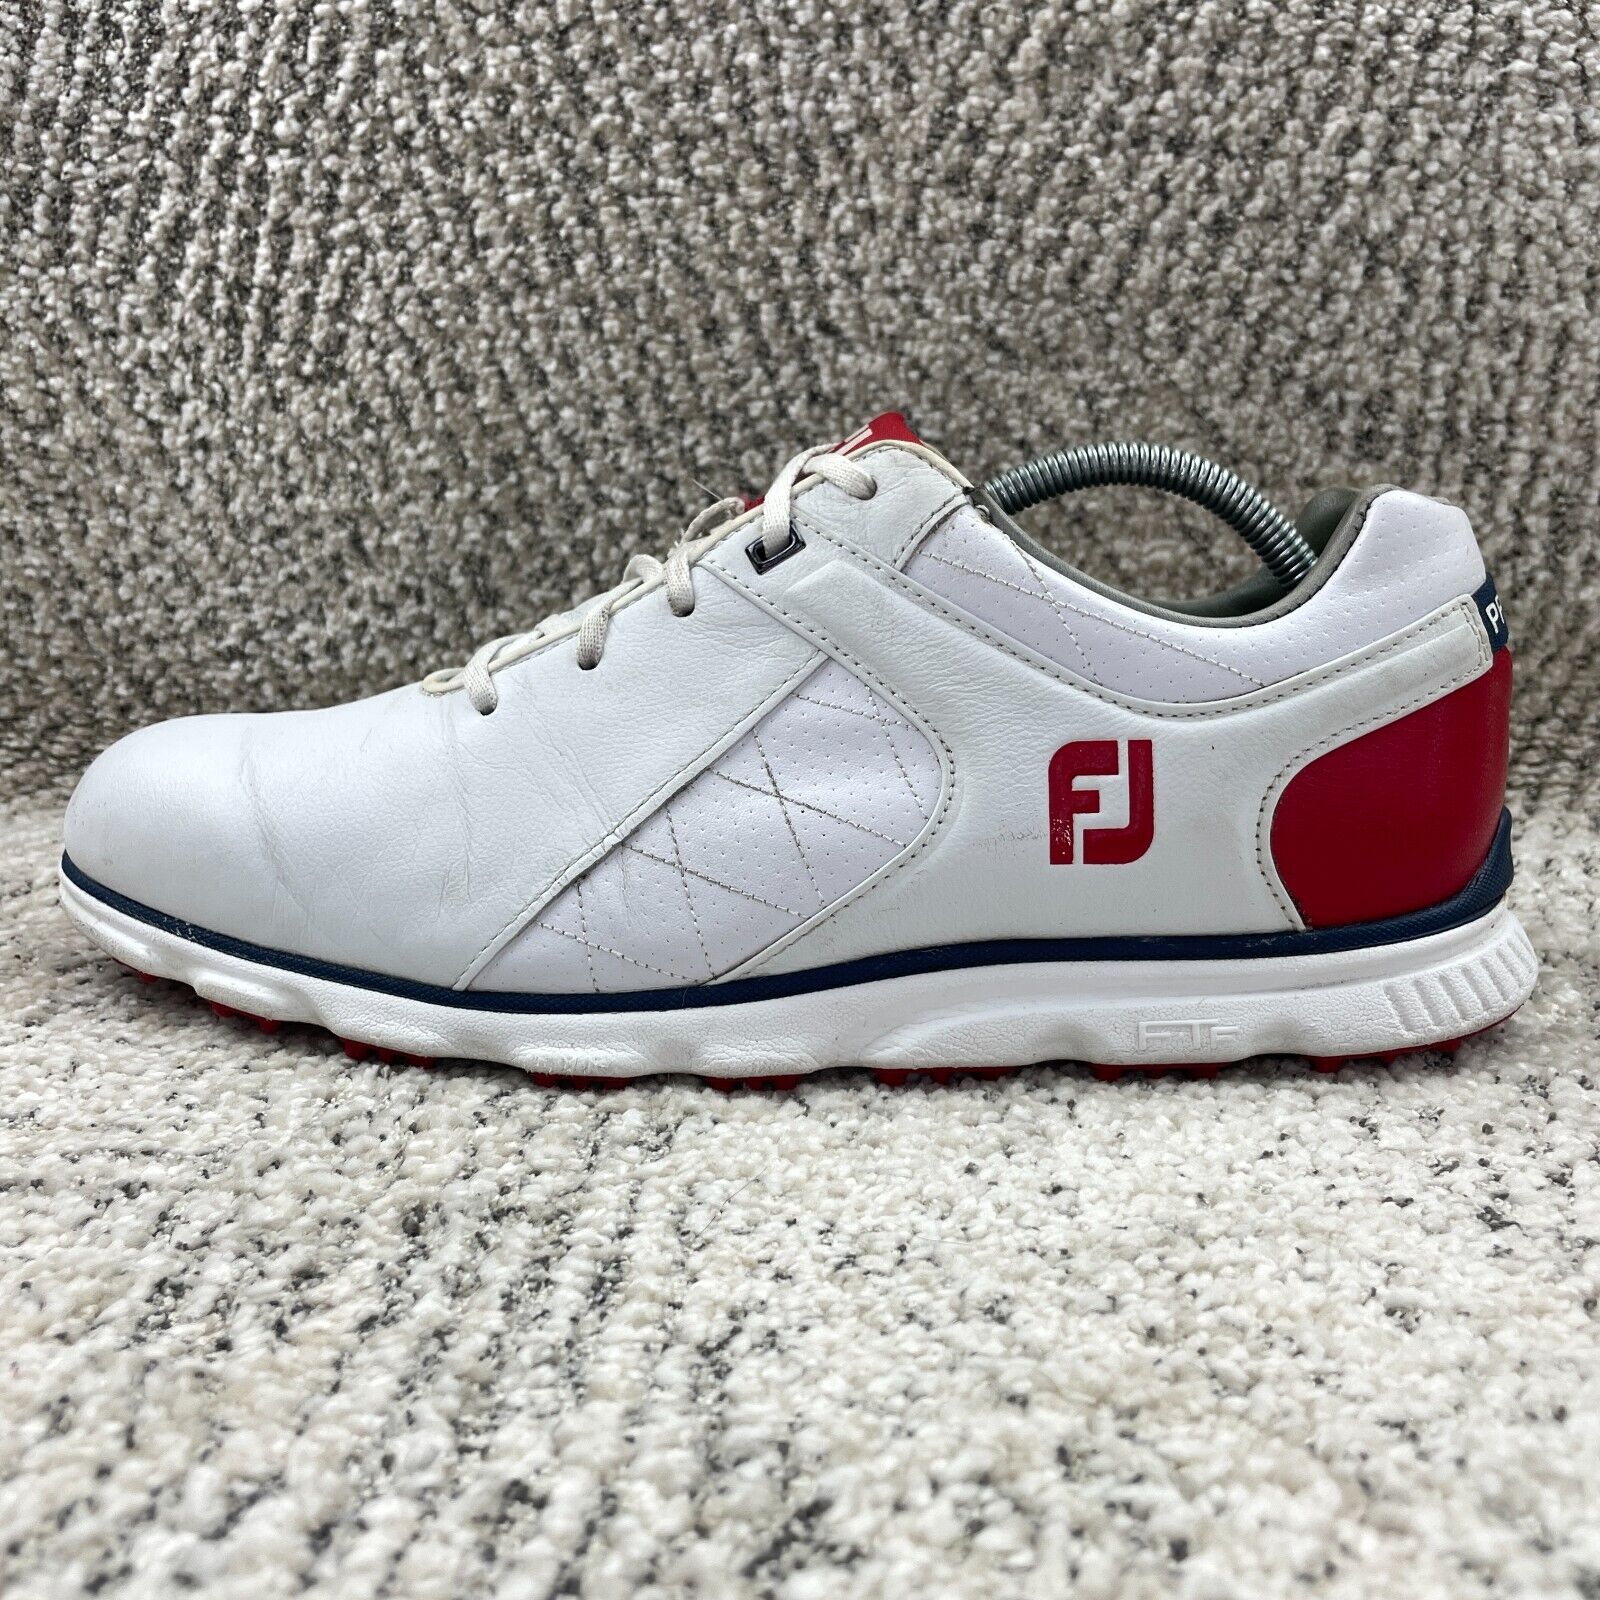 Footjoy Spikeless Golf Shoes Mens Size 11 M Pro SL White Red Leather Waterproof